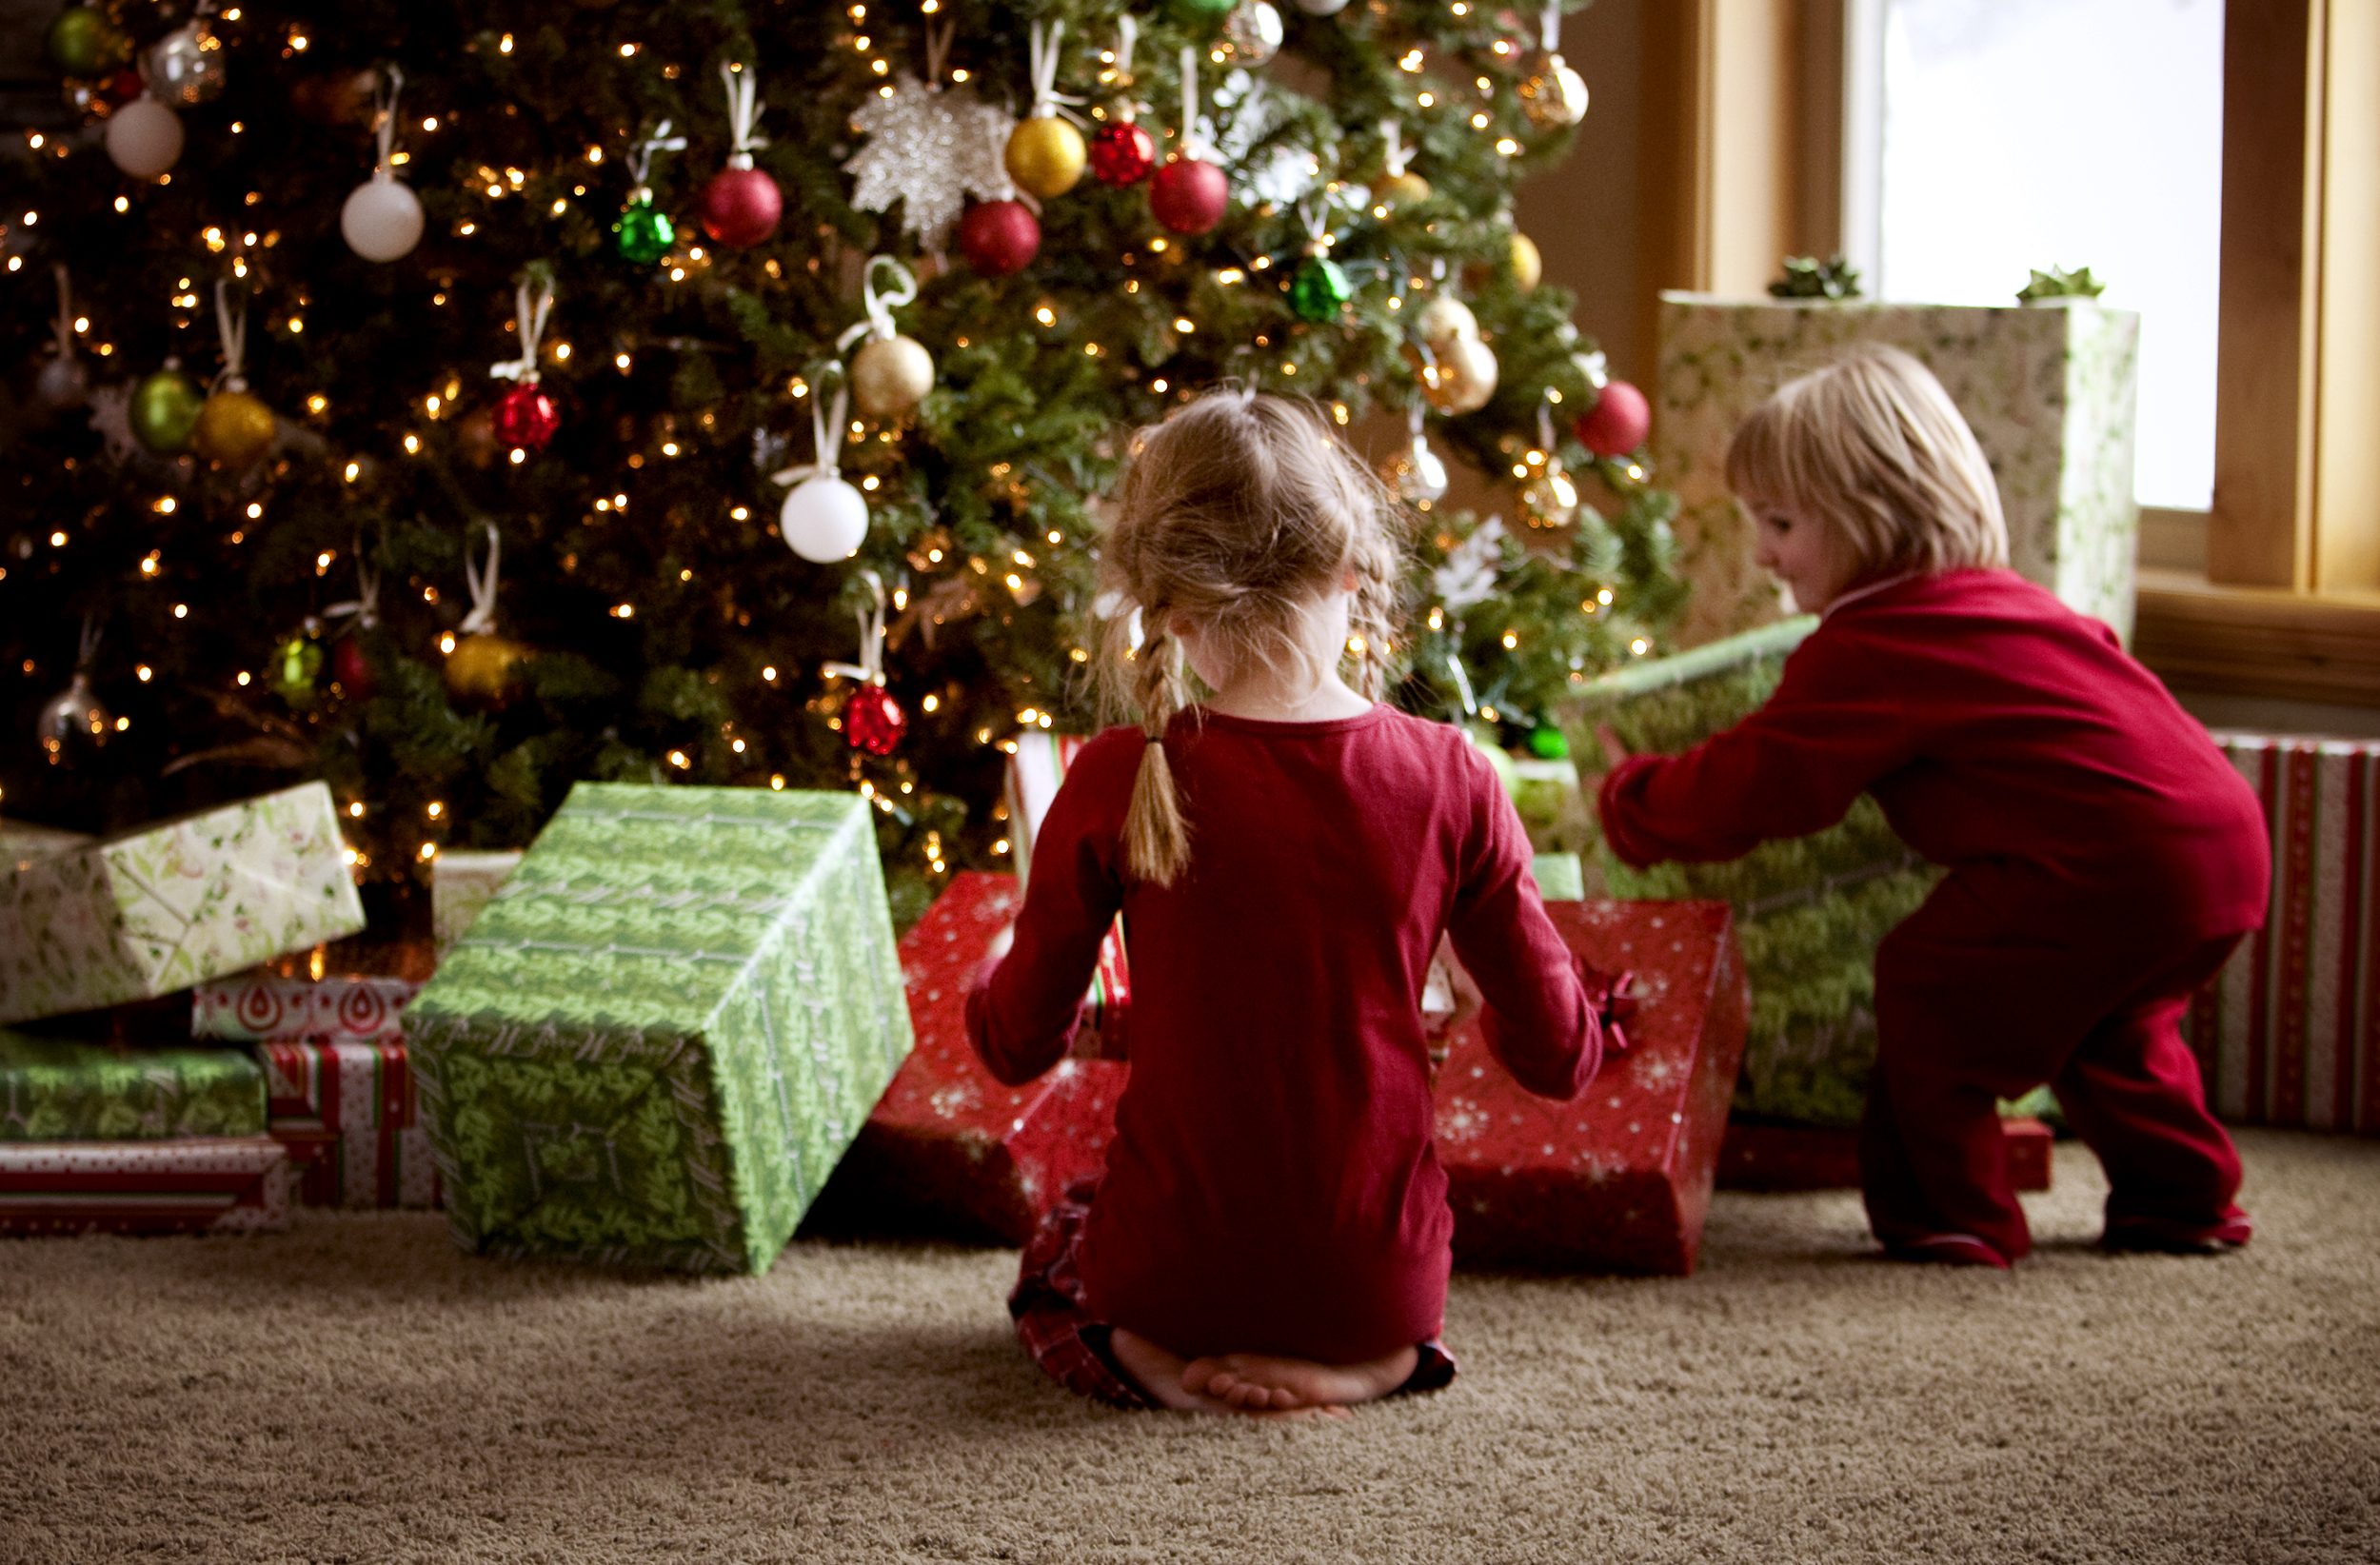 christmas gift ideas for parents from preschoolers